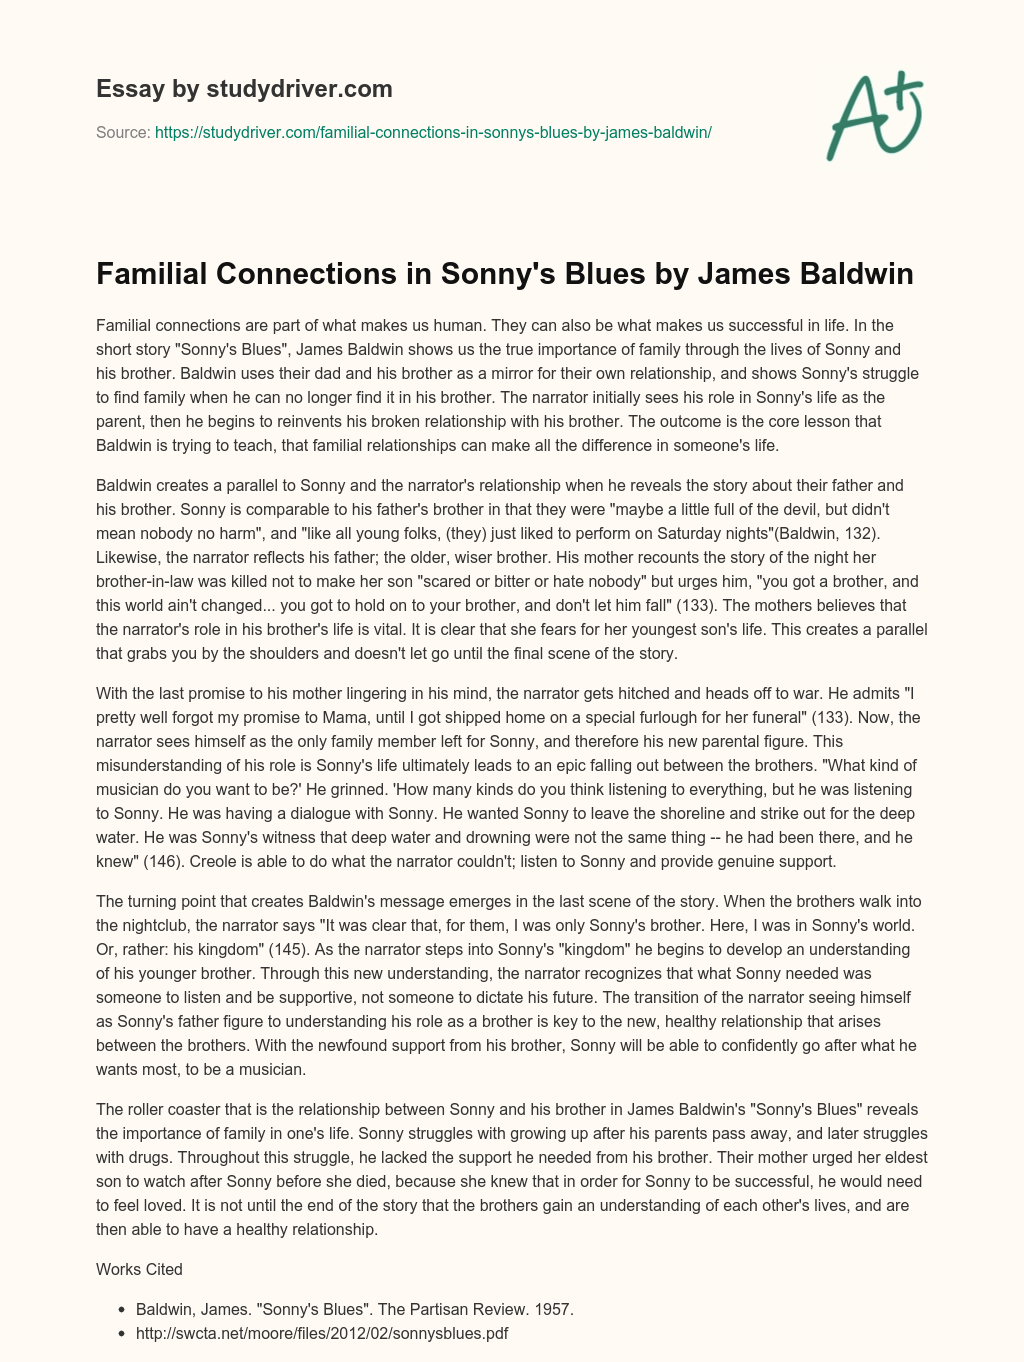 Familial Connections in Sonny’s Blues by James Baldwin essay